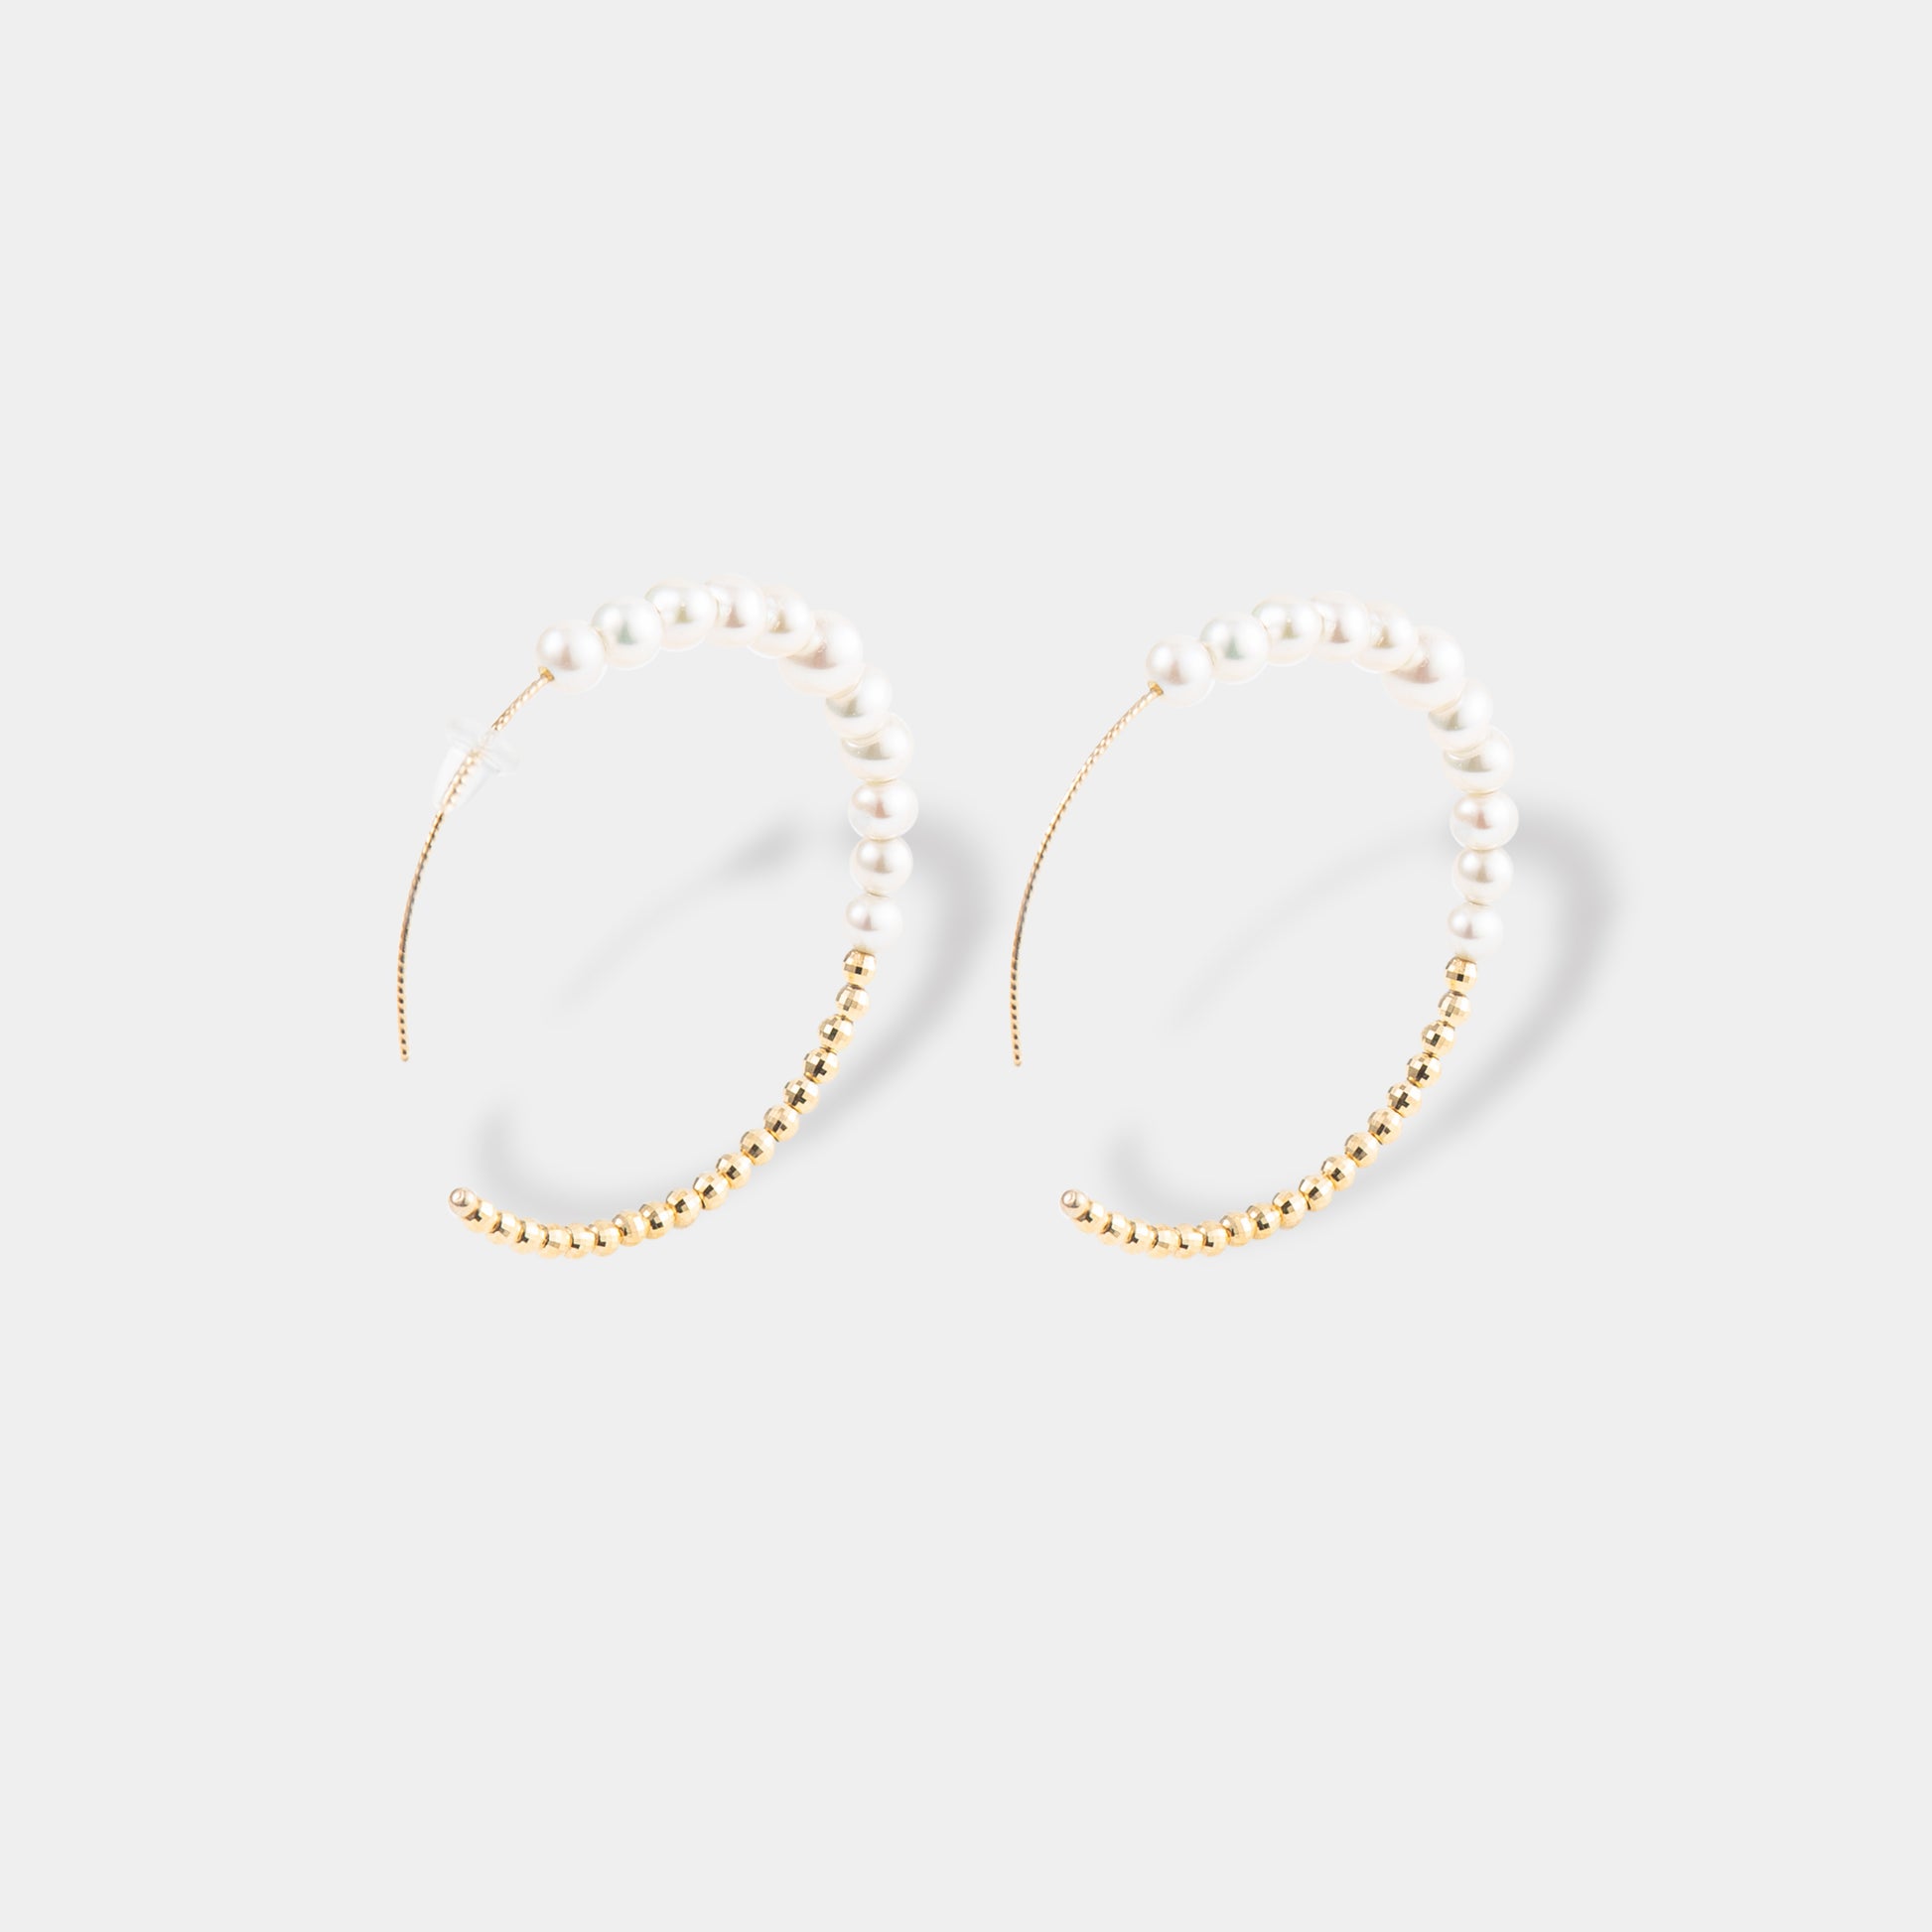 Stunning gold and pearl hoop earrings, a chic and timeless addition to your jewelry collection.